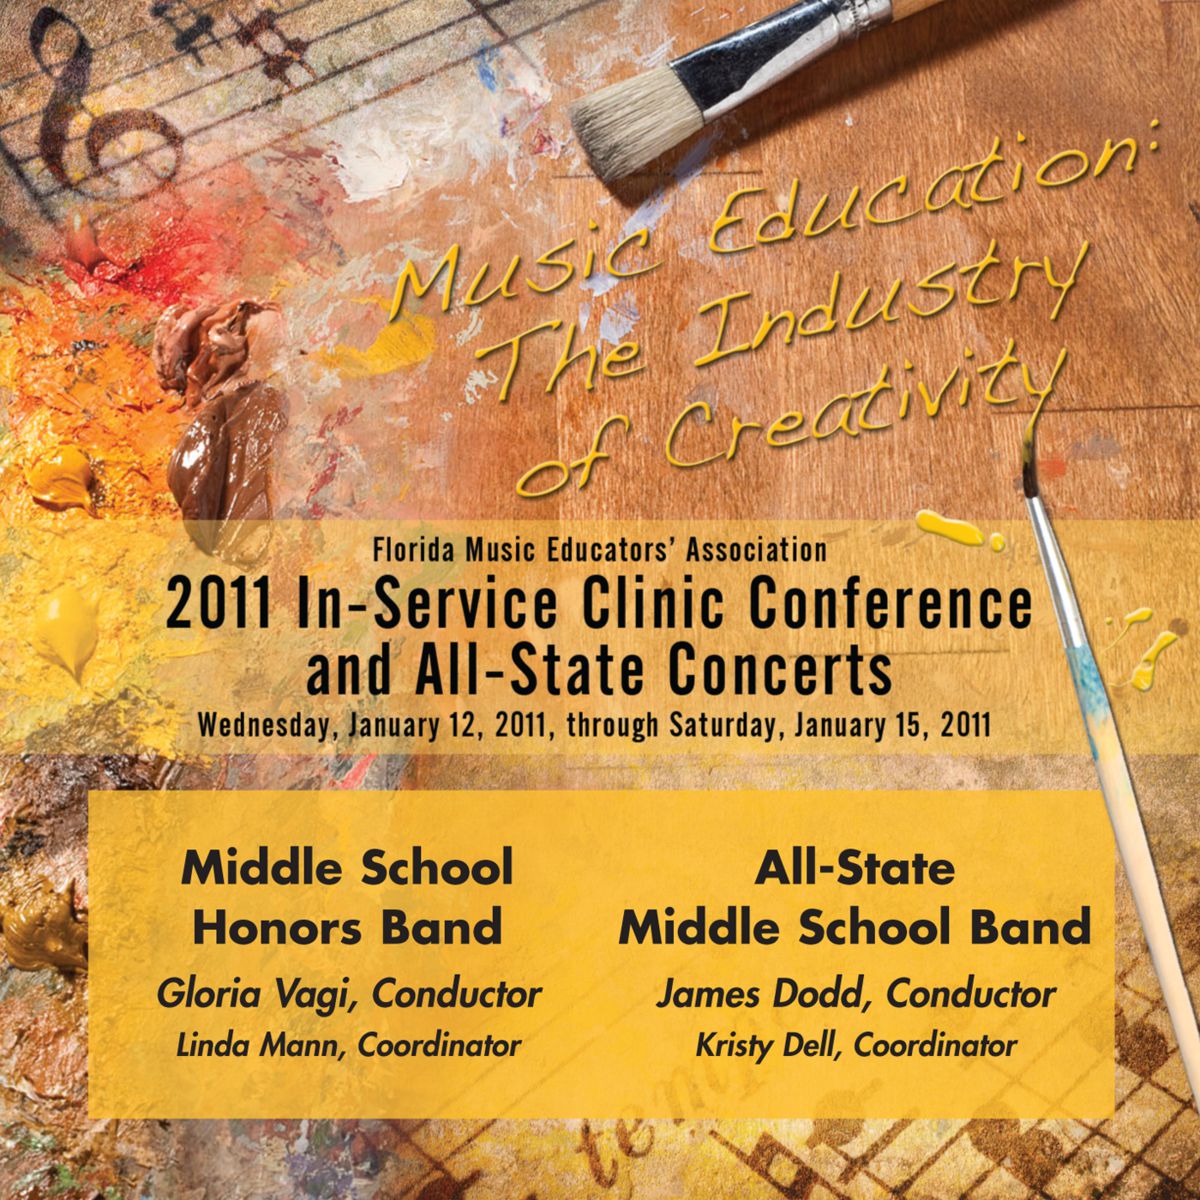 2011 Florida Music Educators Association: Middle School Honors Band and All-State Middle School Band - cliquer ici